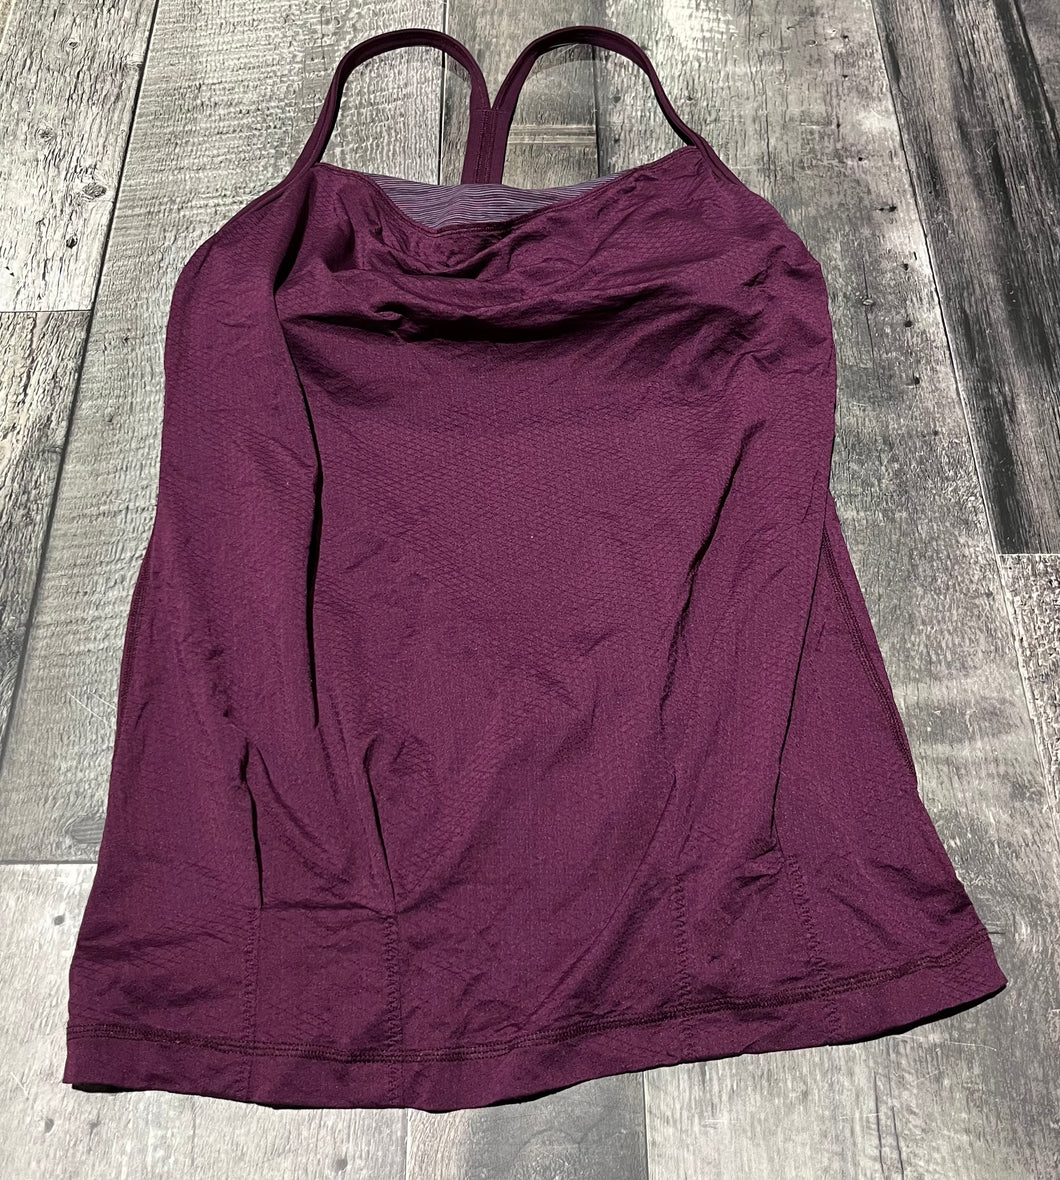 Lululemon purple top - Hers no size approx 8-10